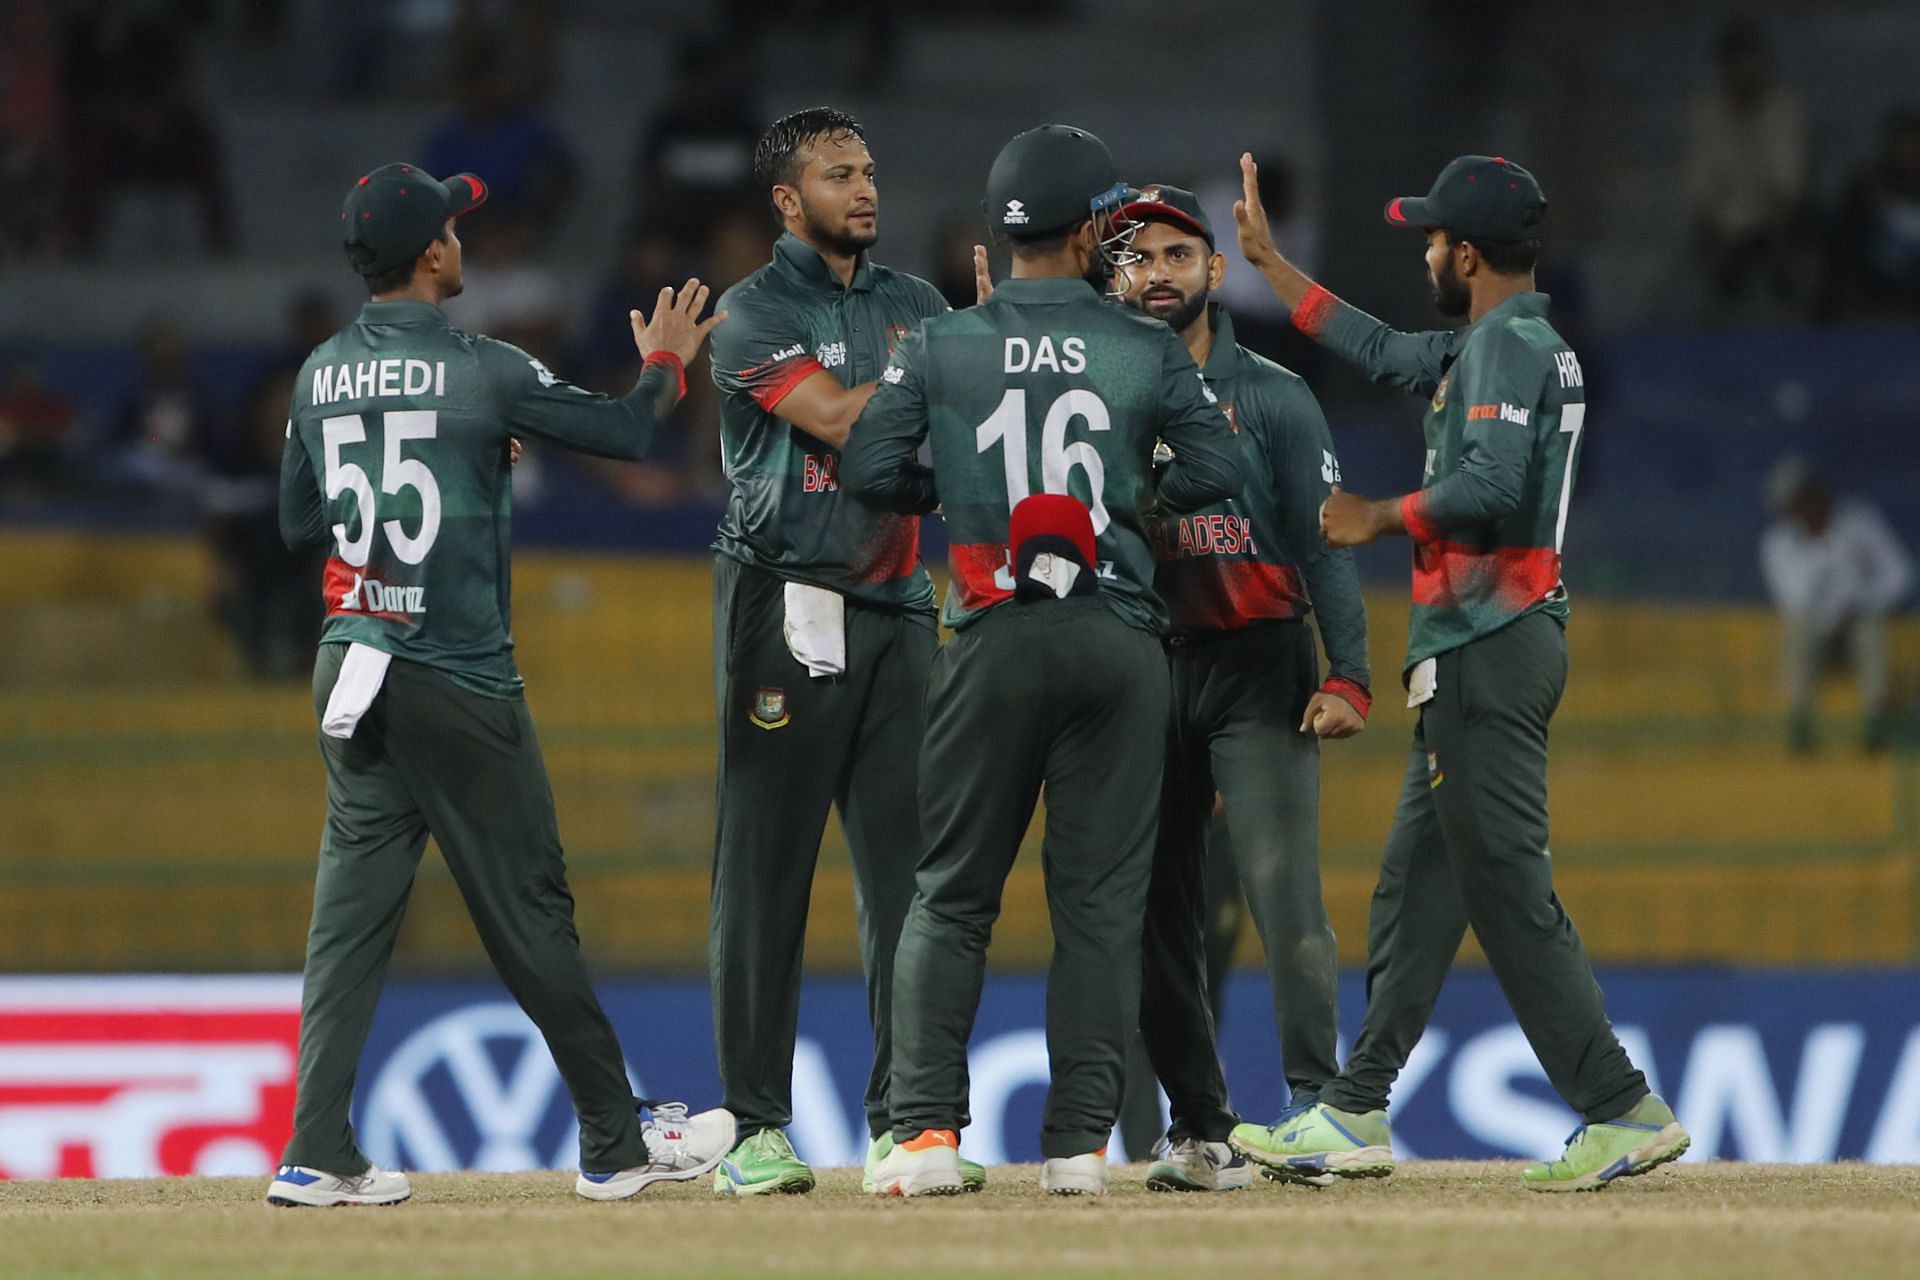 Bangladesh have strong all-rounders in the mix